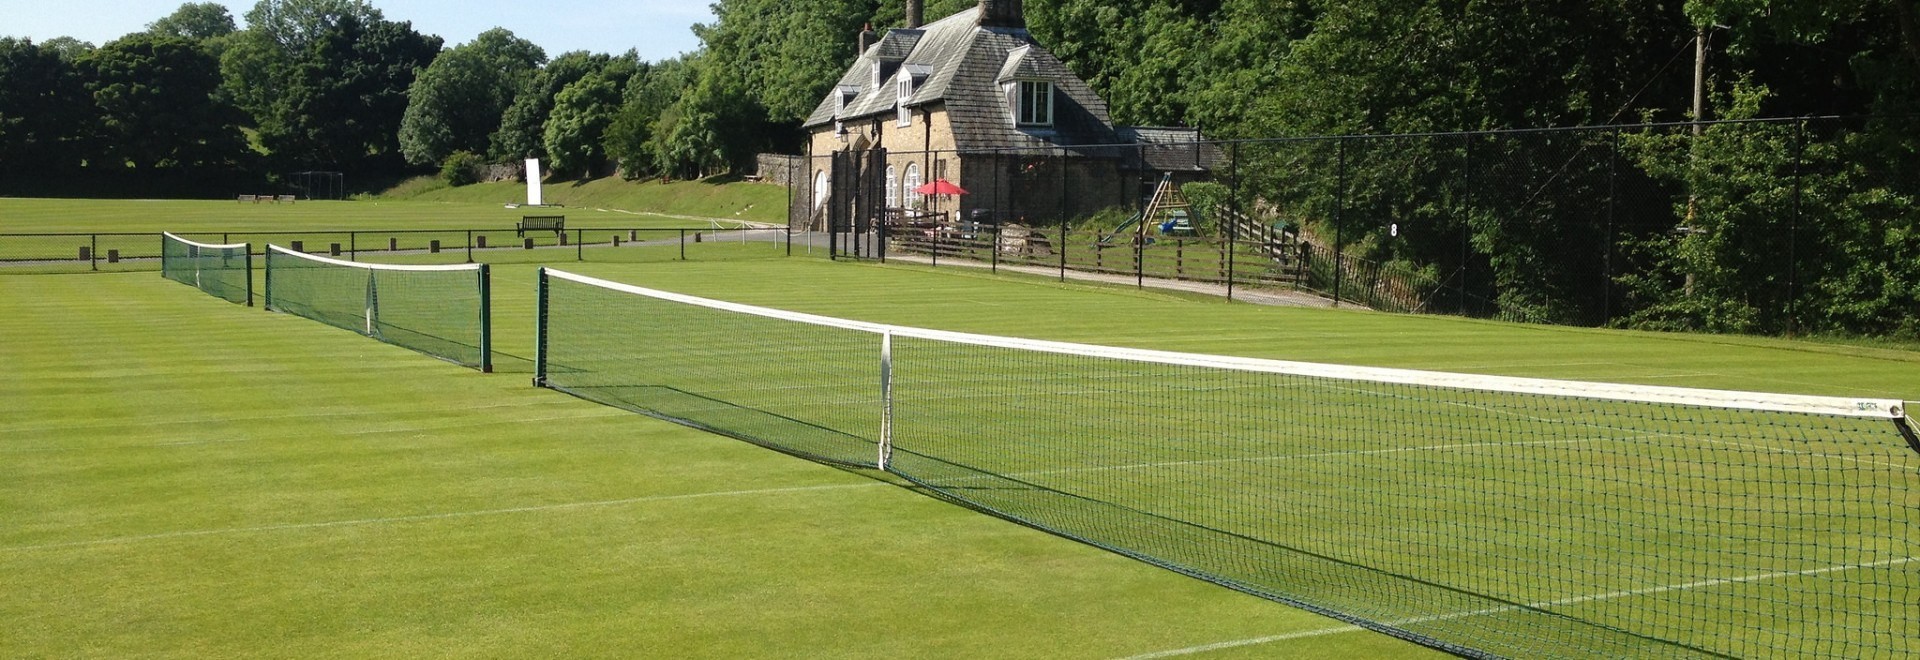 Tennis Vacations and Holidays in England - Book tennis resorts and tennis camps in England